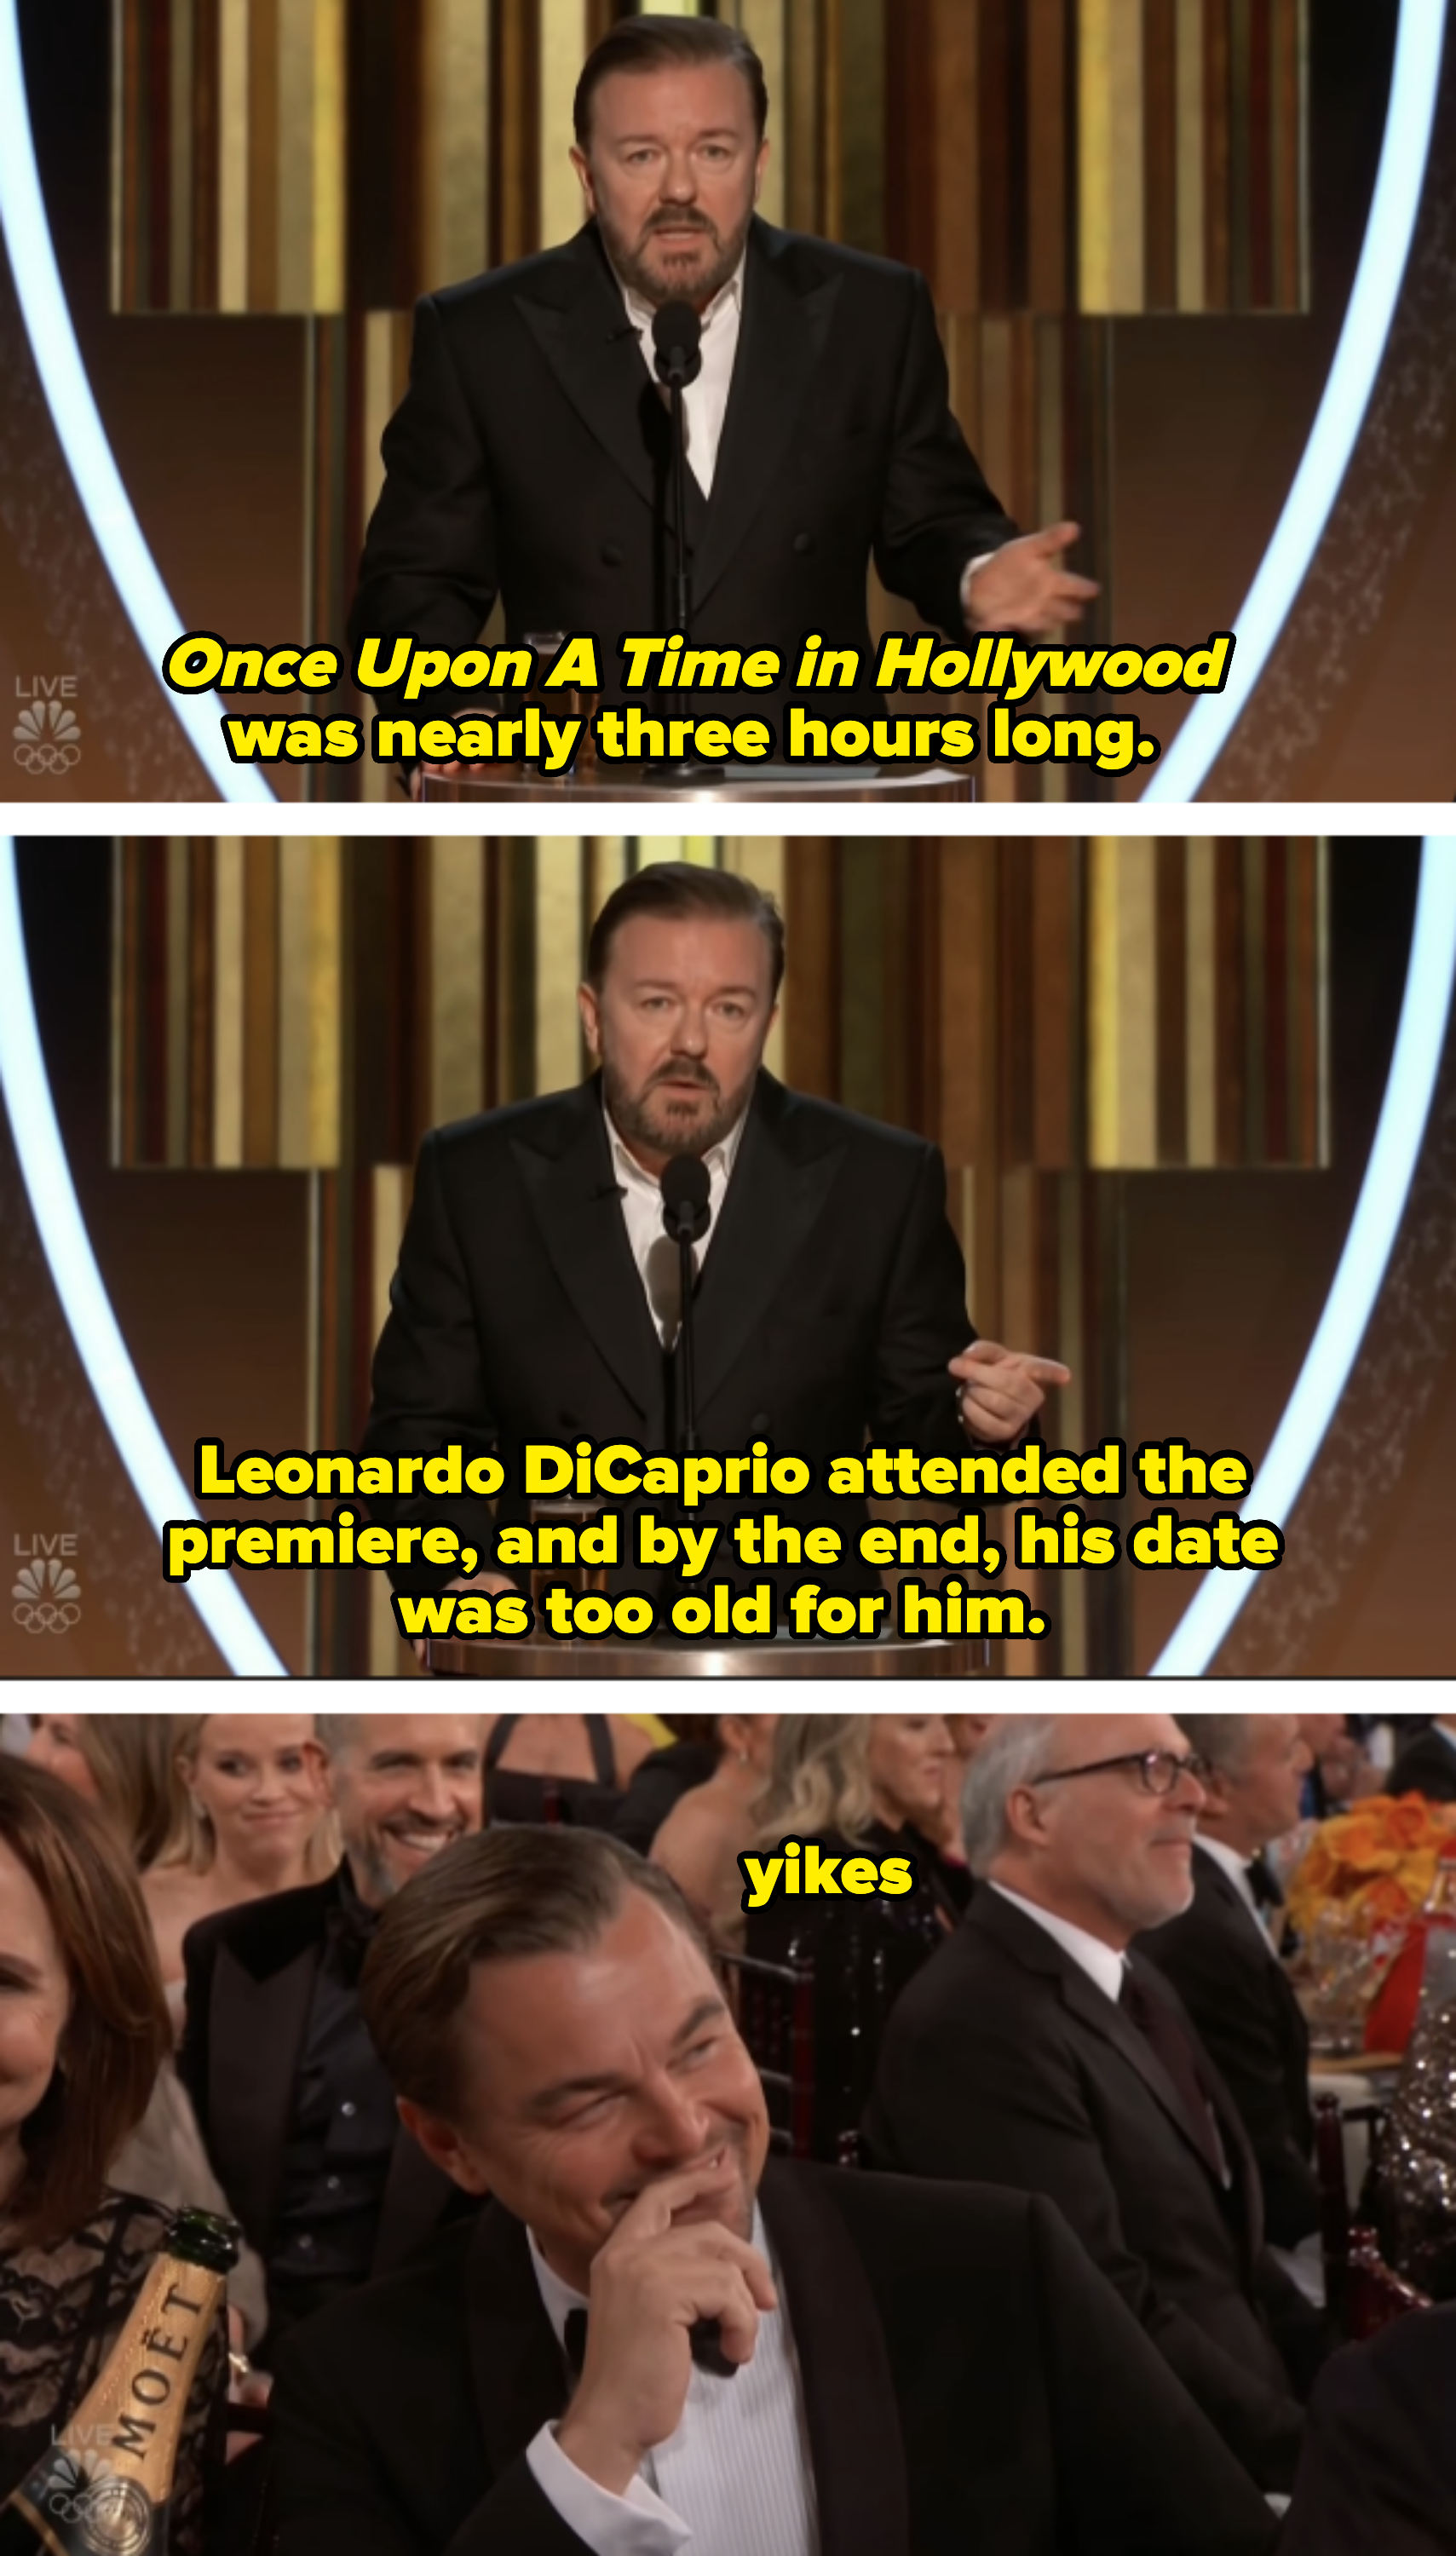 Ricky Gervais onstage roasting Leo DiCaprio